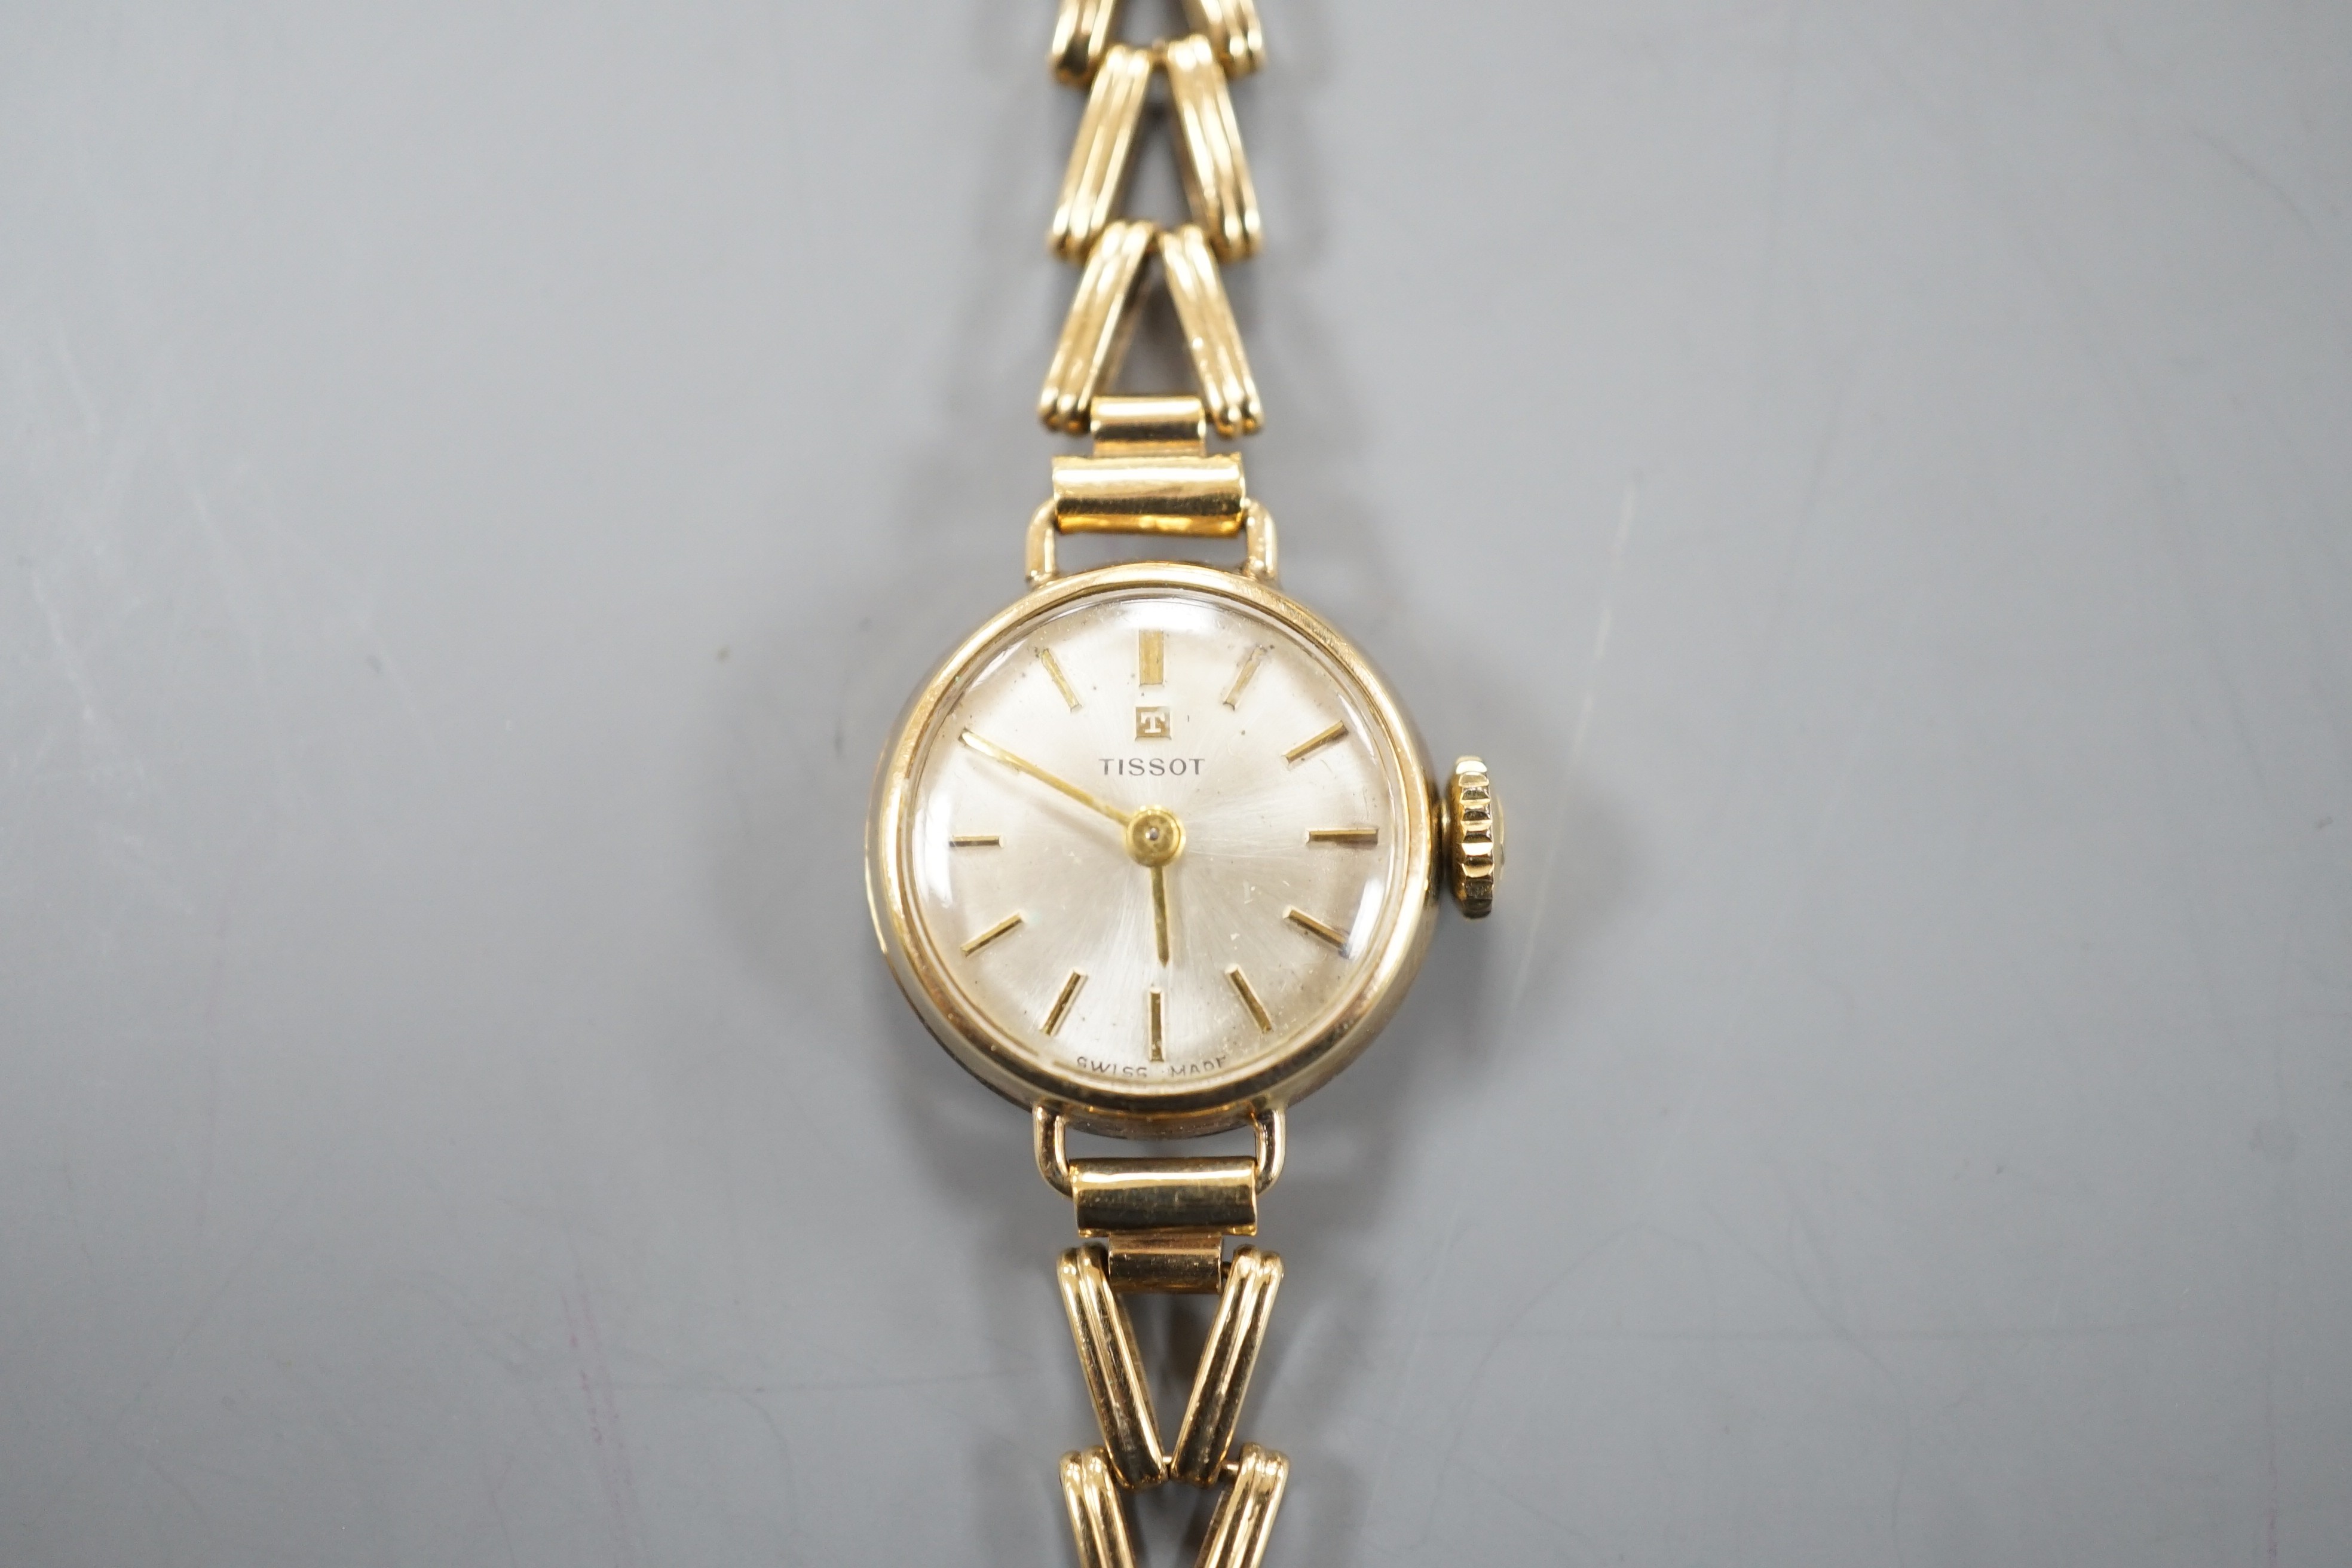 A lady's 9ct gold Tissot manual wind wrist watch, on a 9ct gold bracelet, overall length 16.25cm, gross weight 11.2 grams.